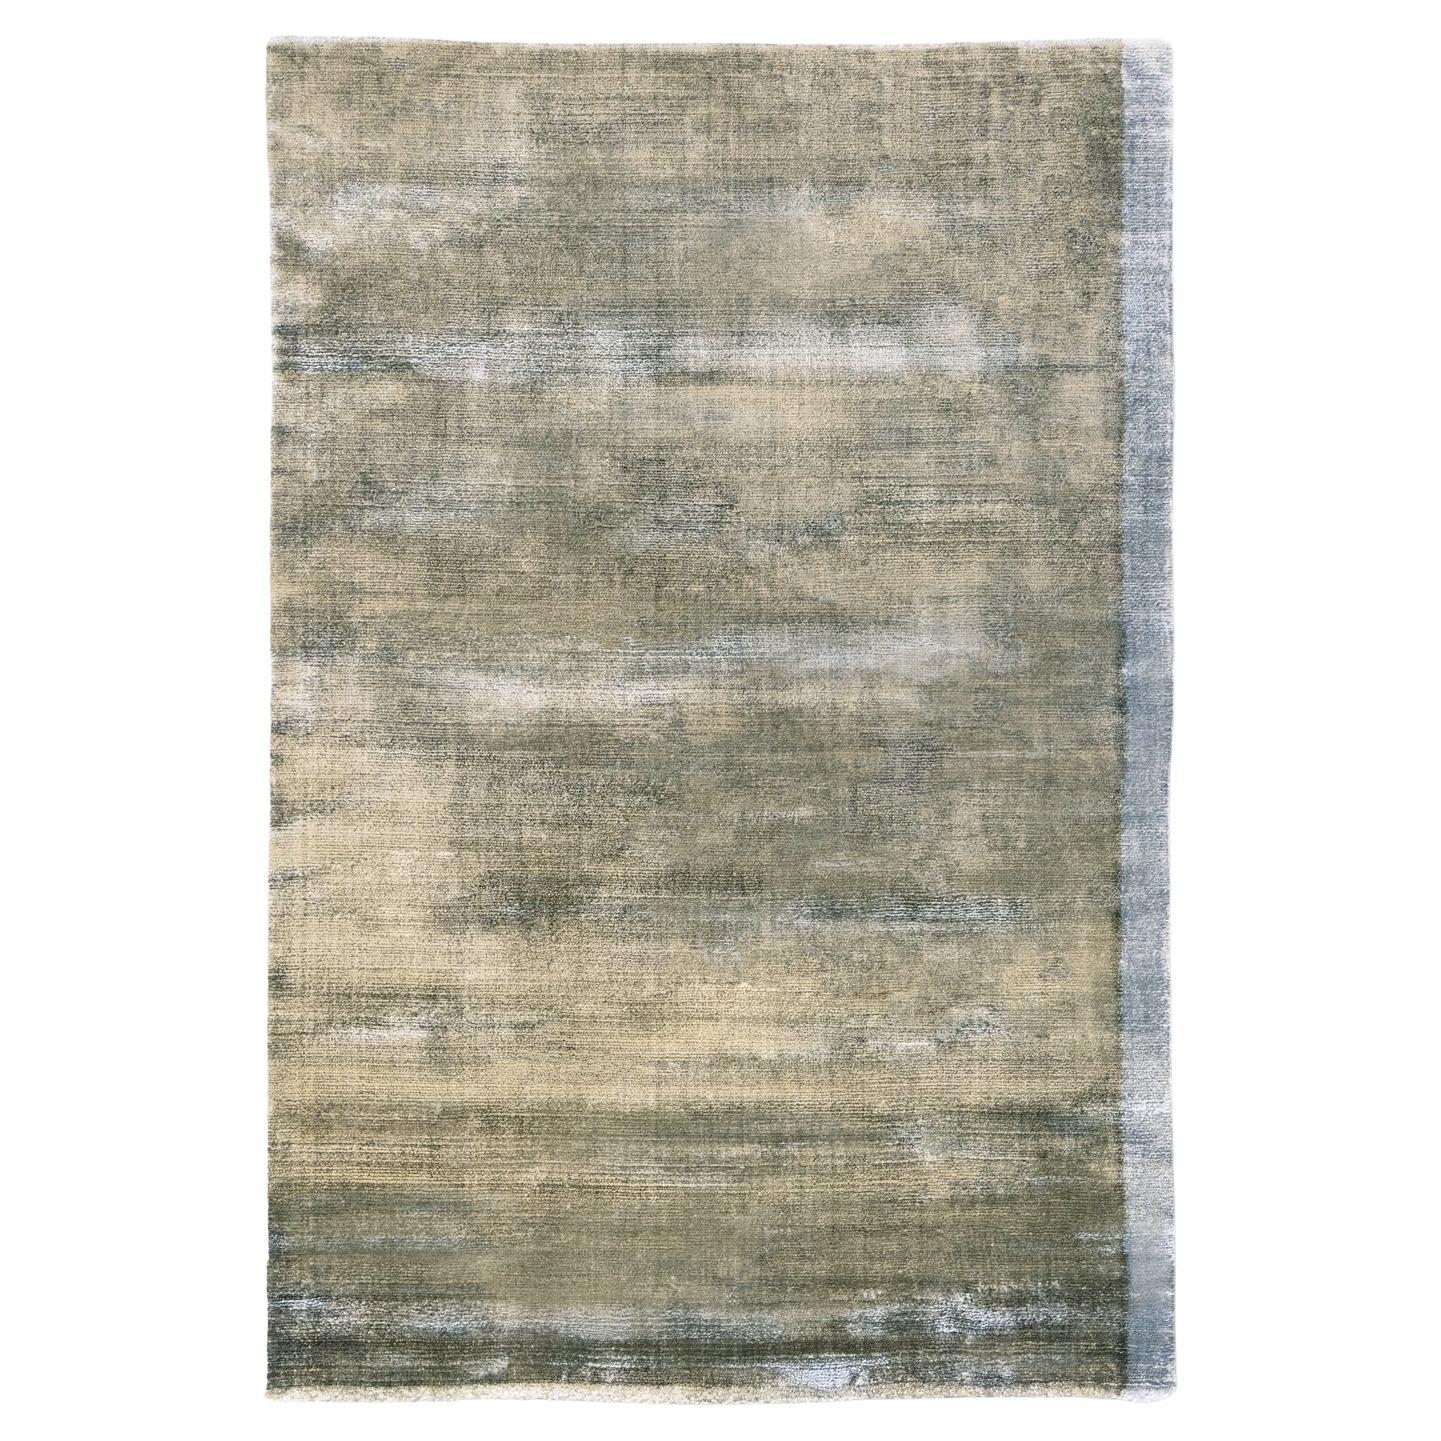 21st Century Shiny Velvety Green Rug by Deanna Comellini in Stock 200x300 cm For Sale